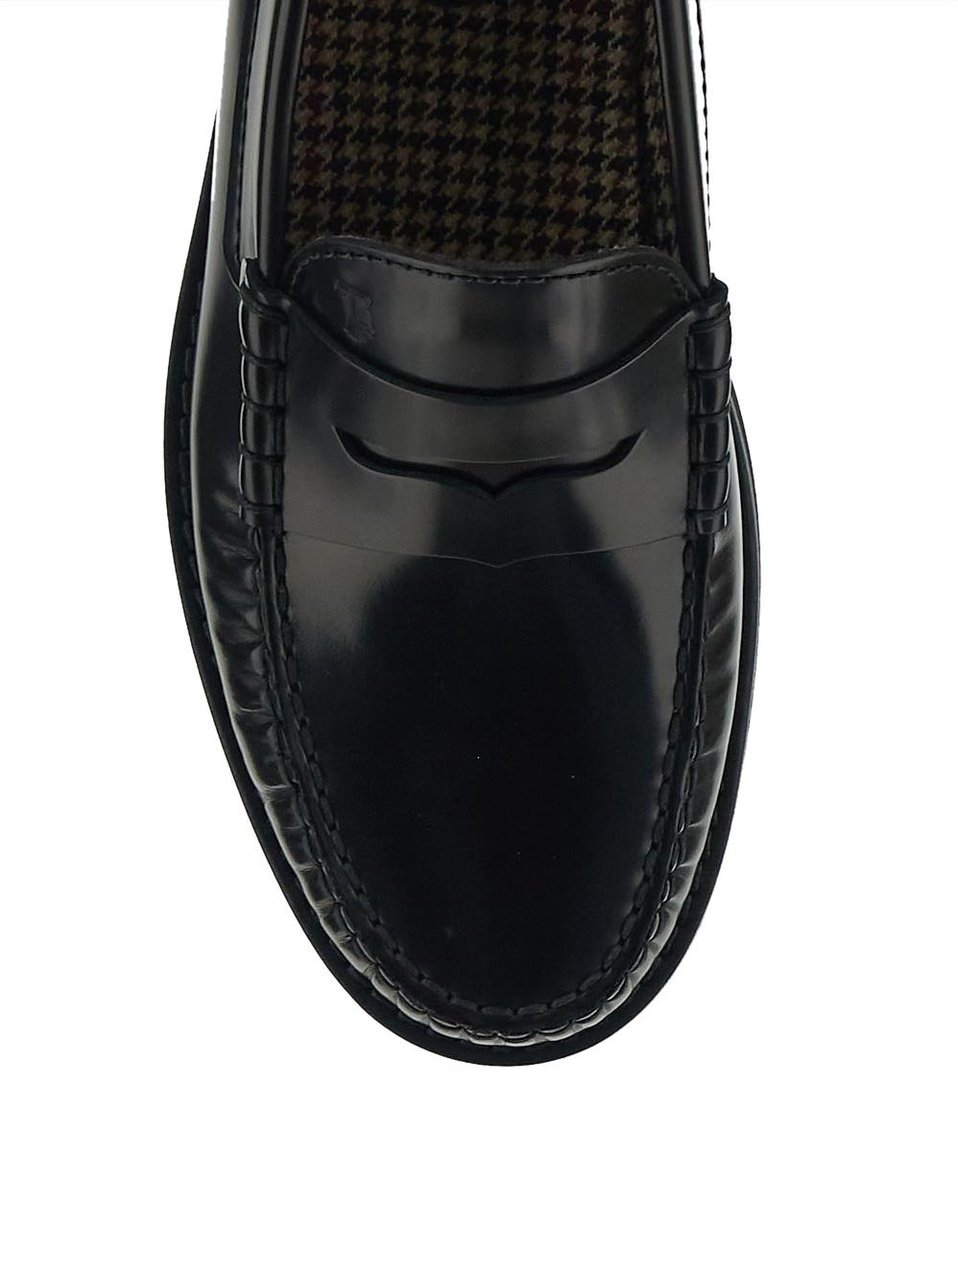 Tod's Loafers Zwart